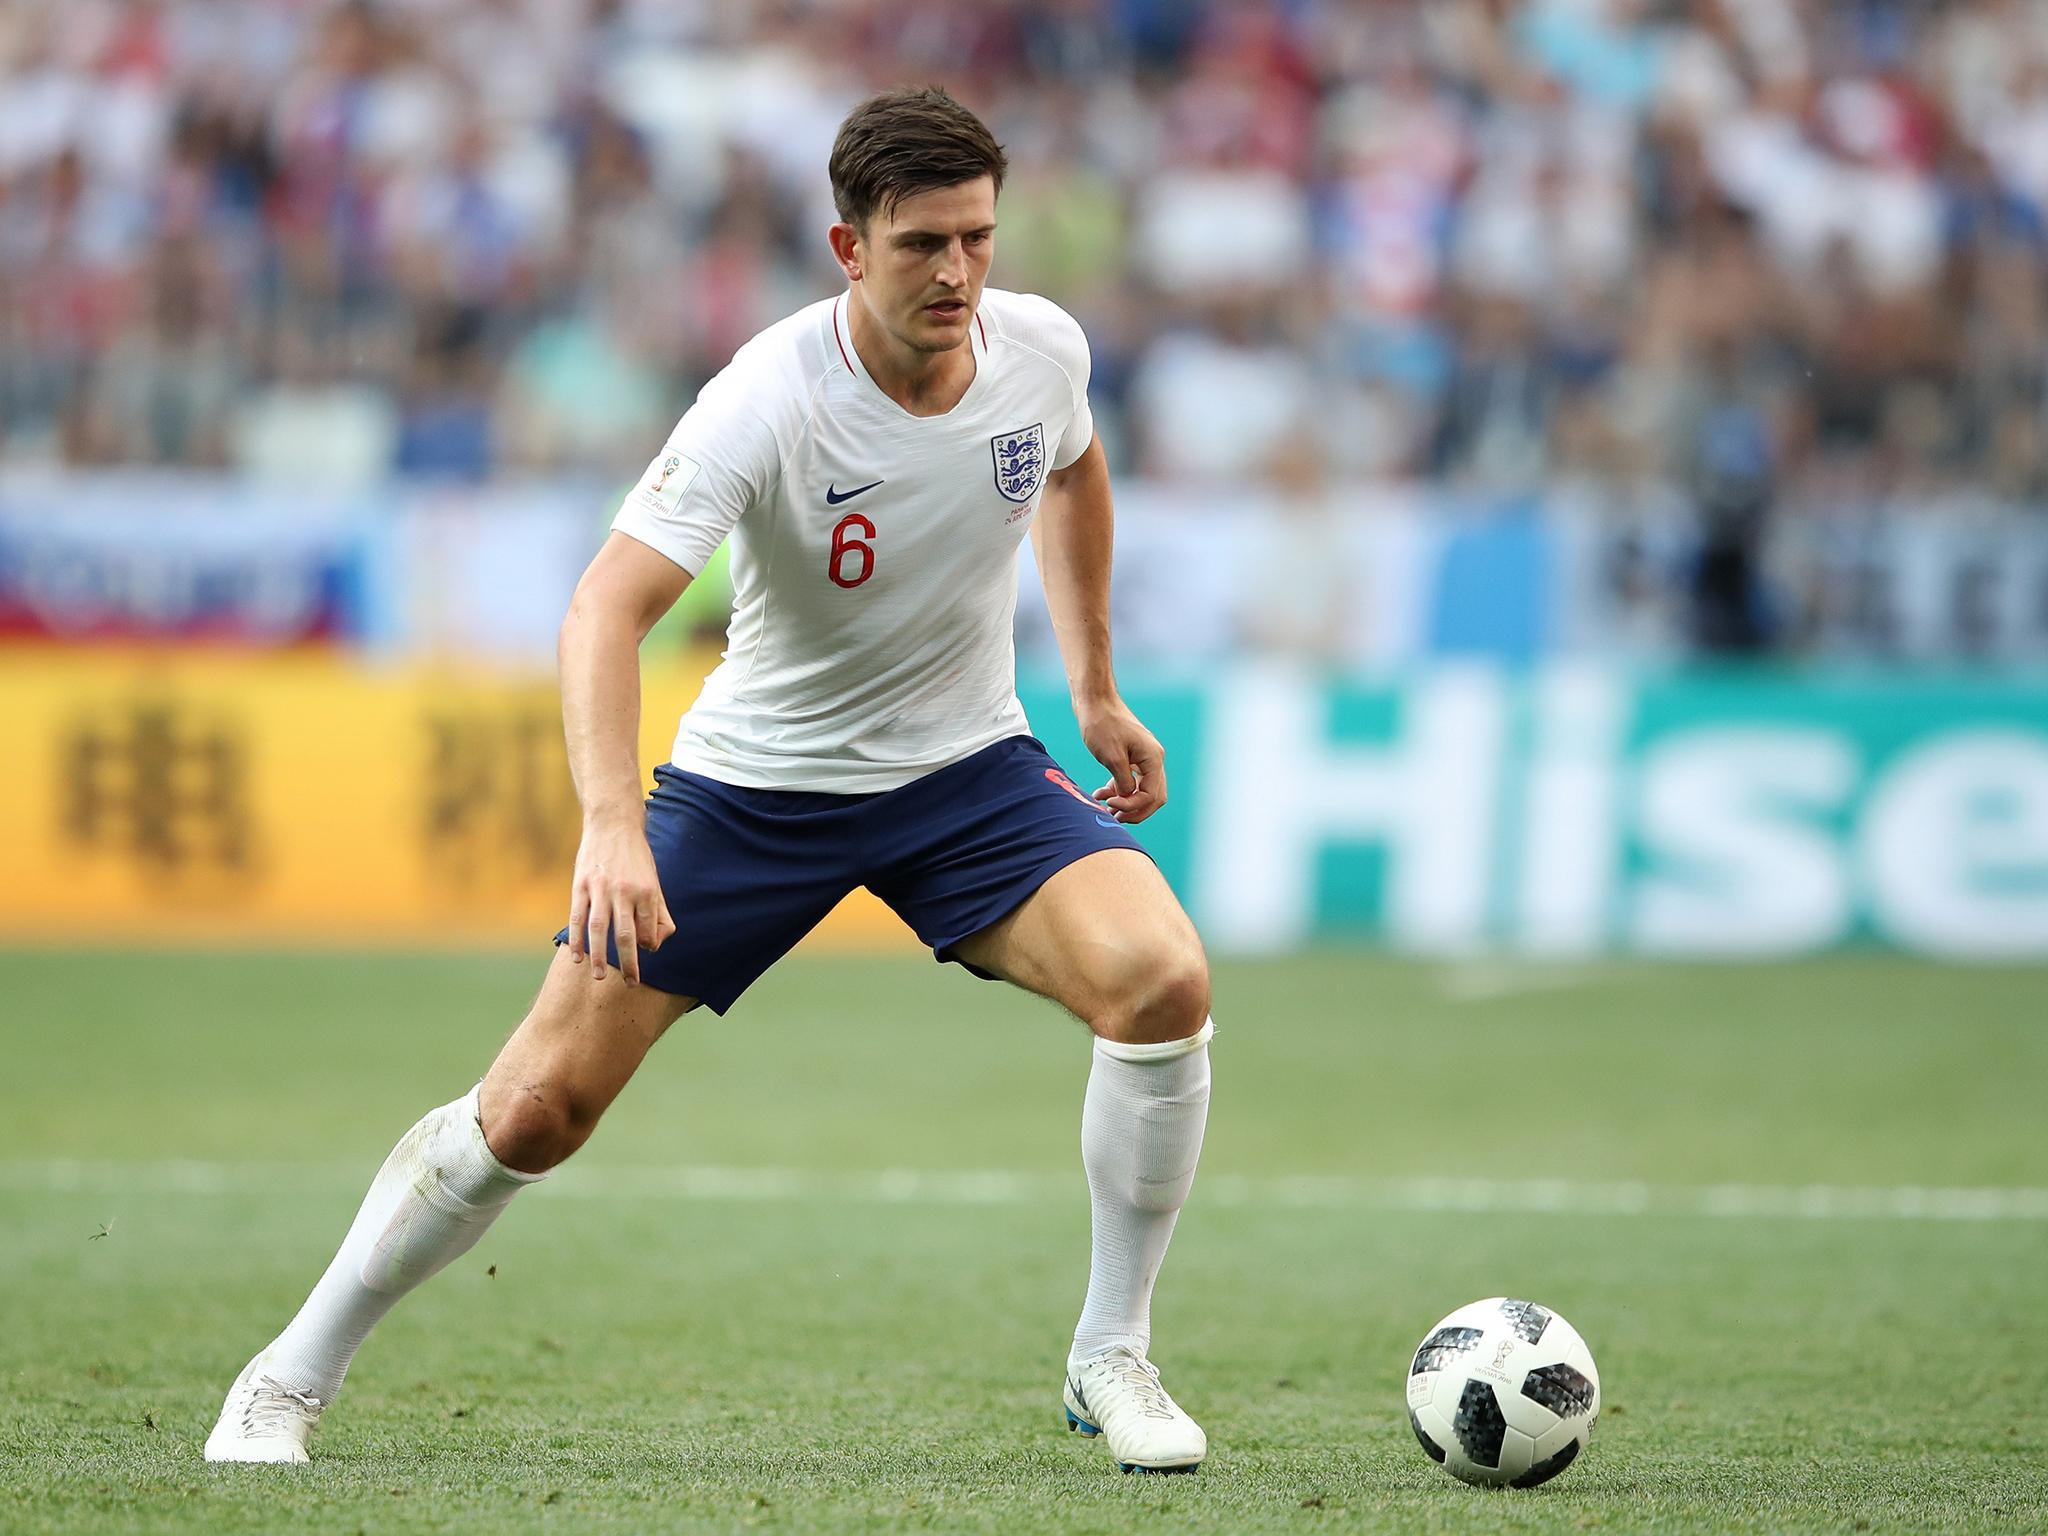 Manchester United transfer news: Harry Maguire will be staying put